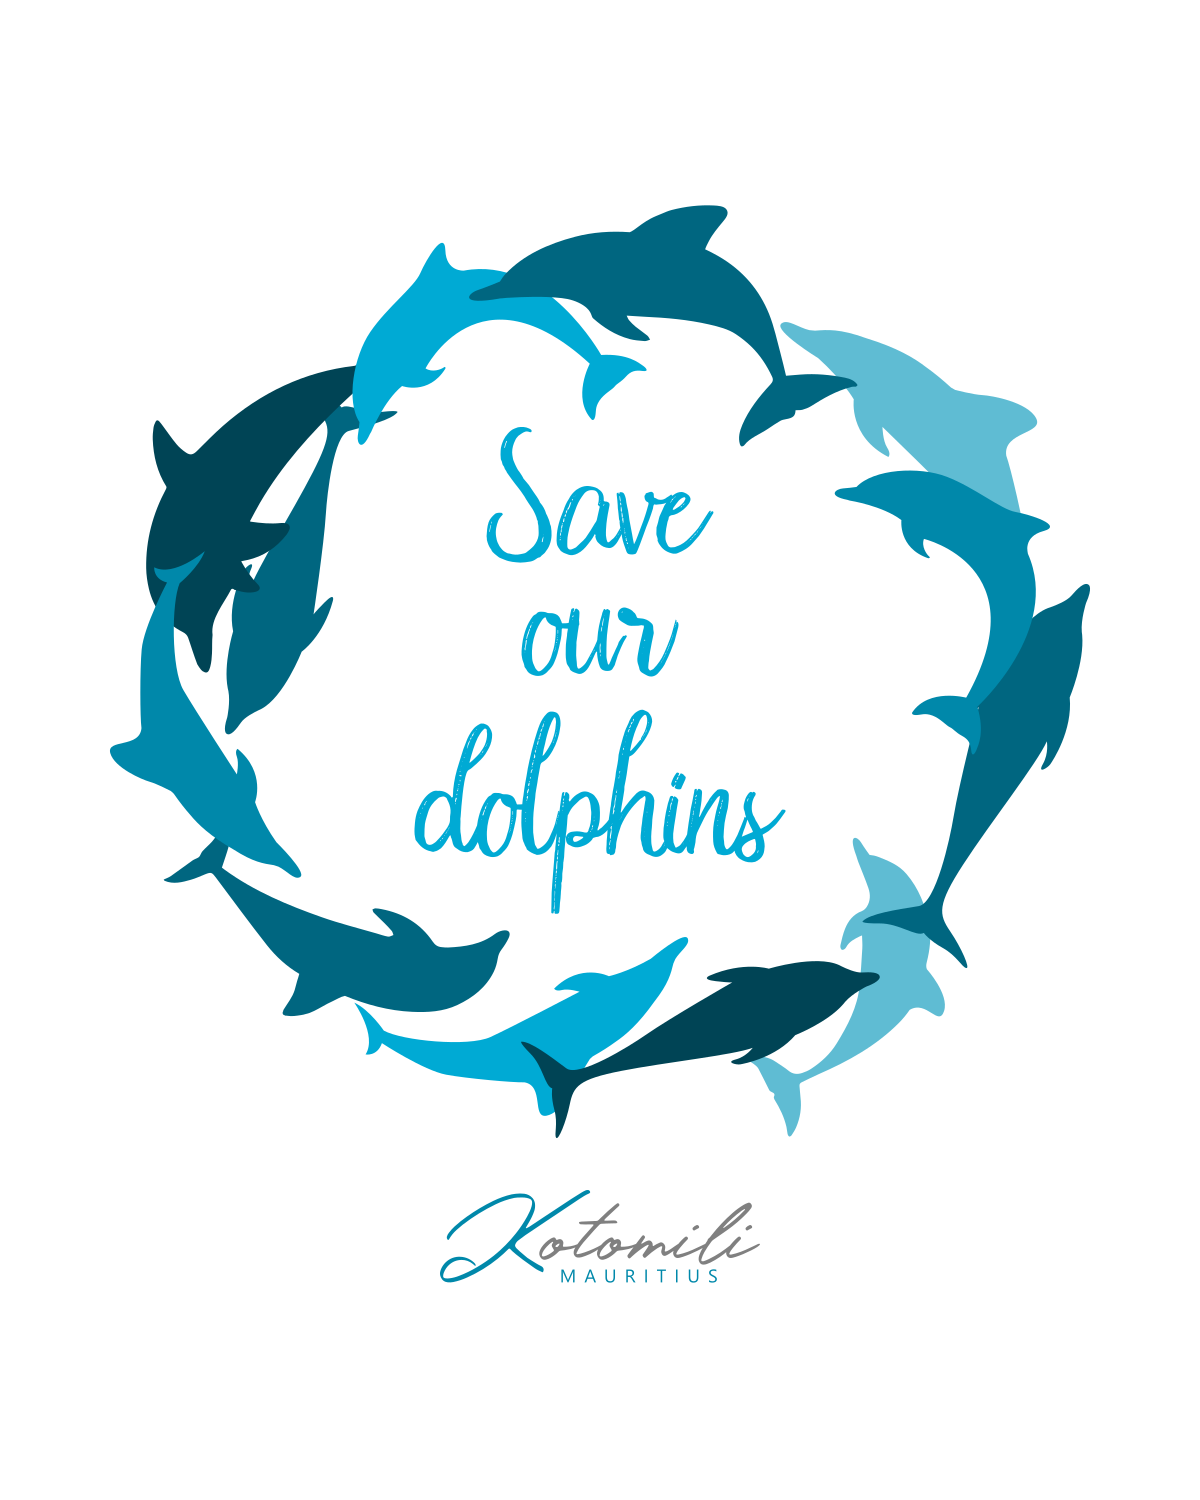 Kotomili Mauritius Save our dolphins